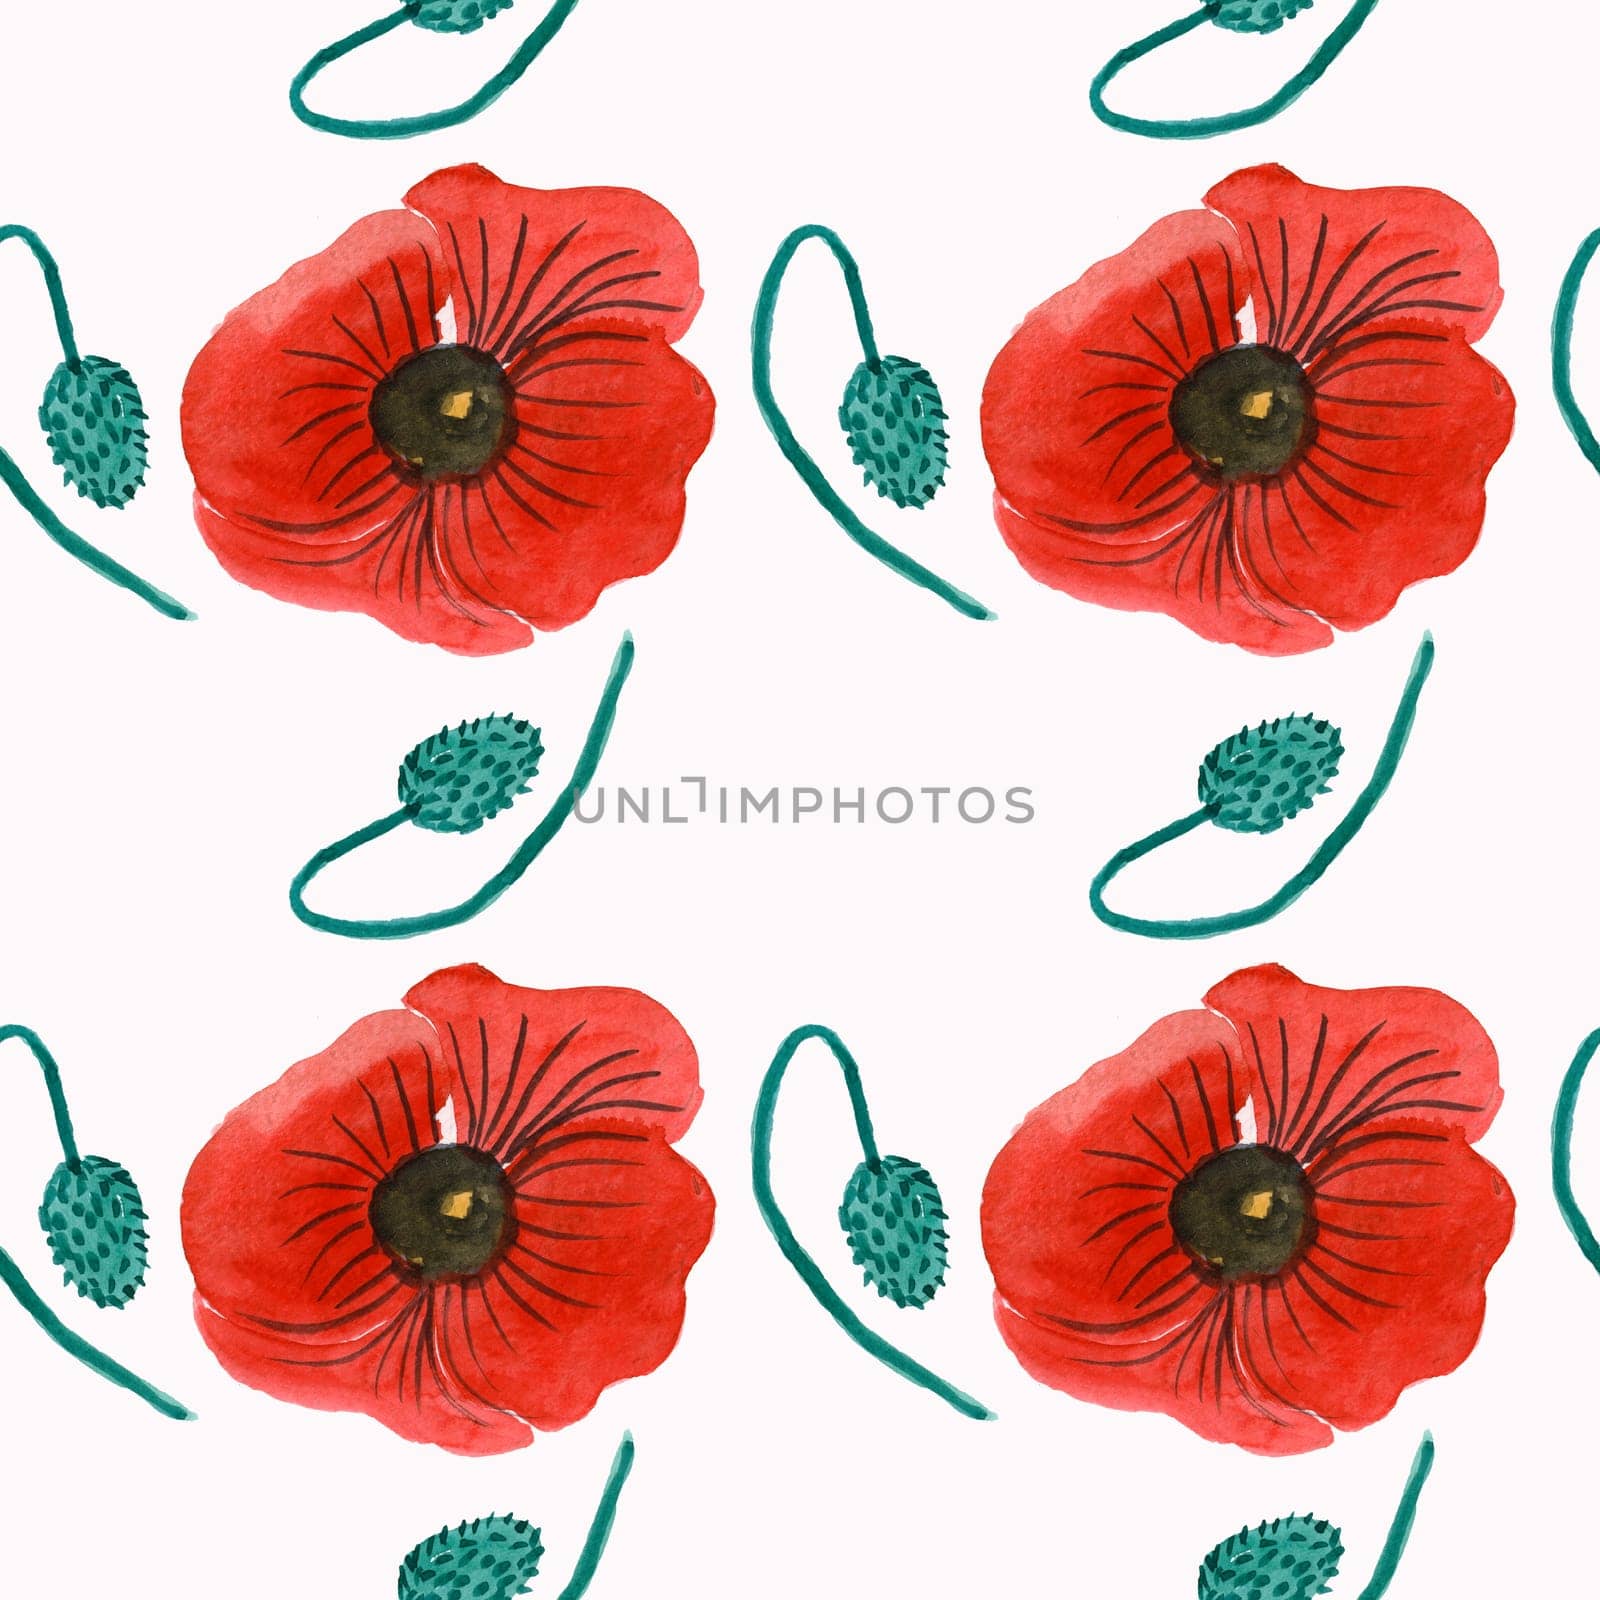 Seamless pattern of red poppies flowers on a by electrovenik